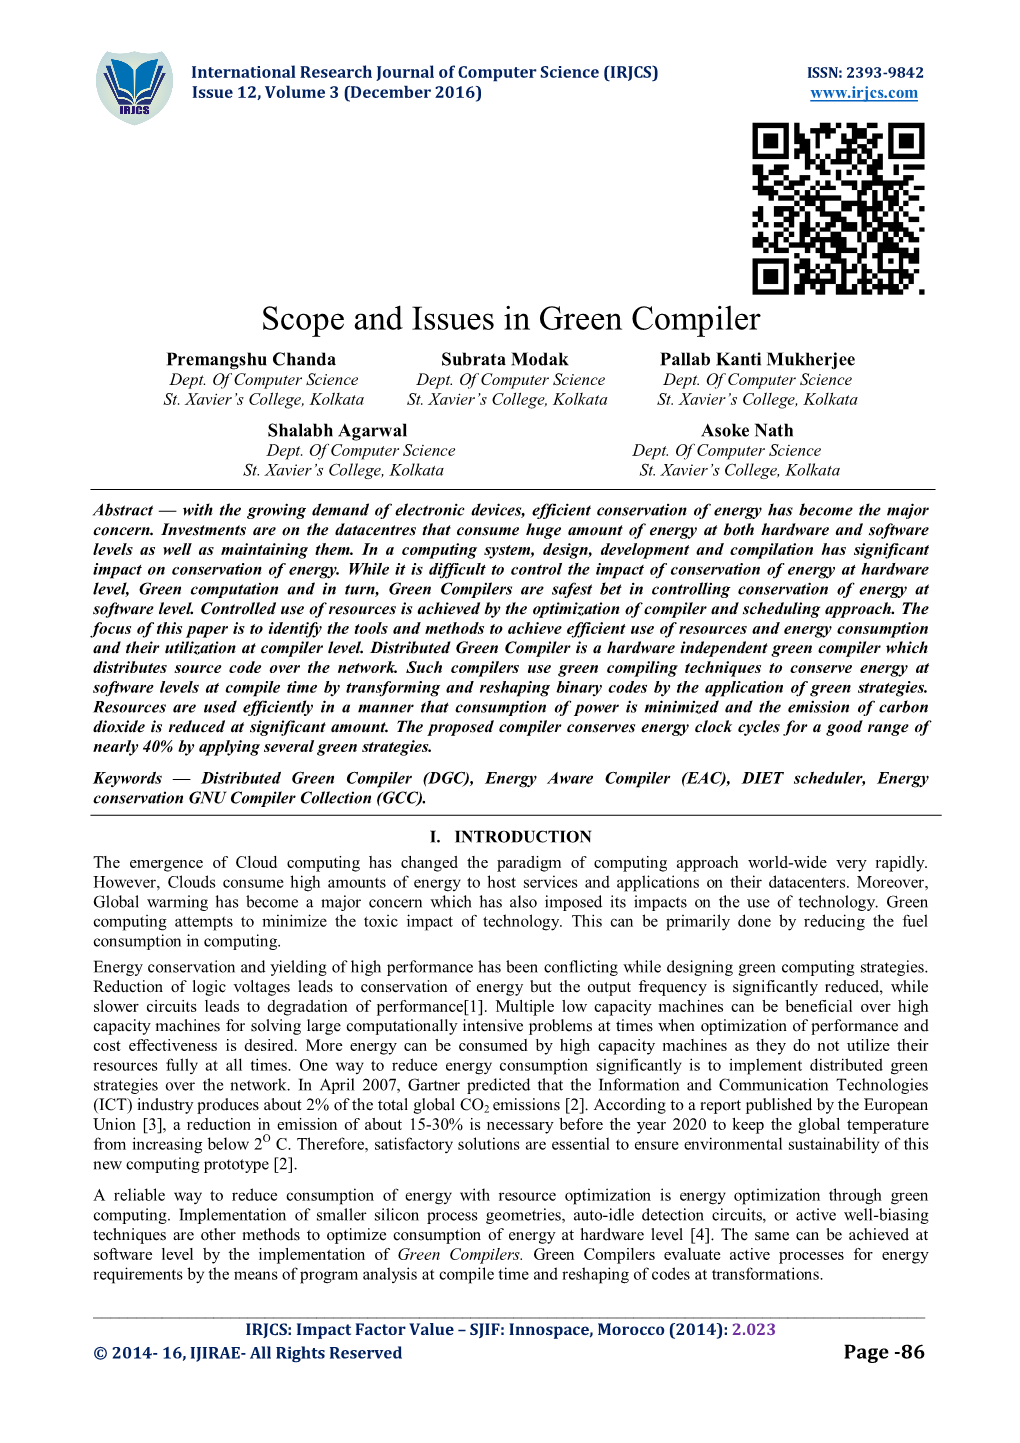 Scope and Issues in Green Compiler